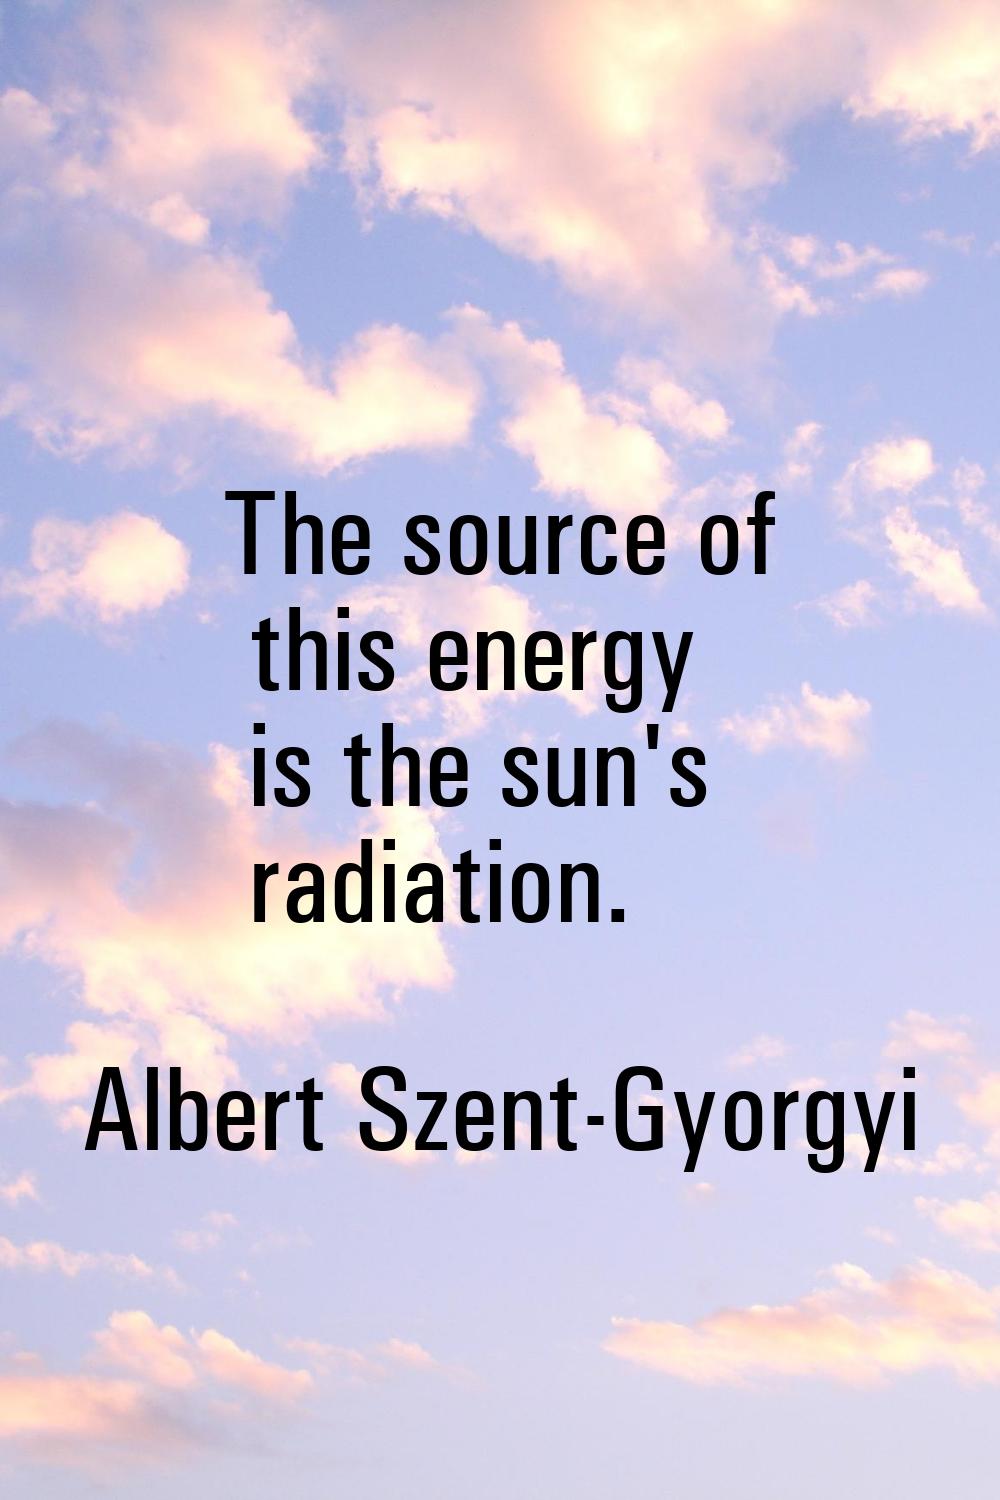 The source of this energy is the sun's radiation.